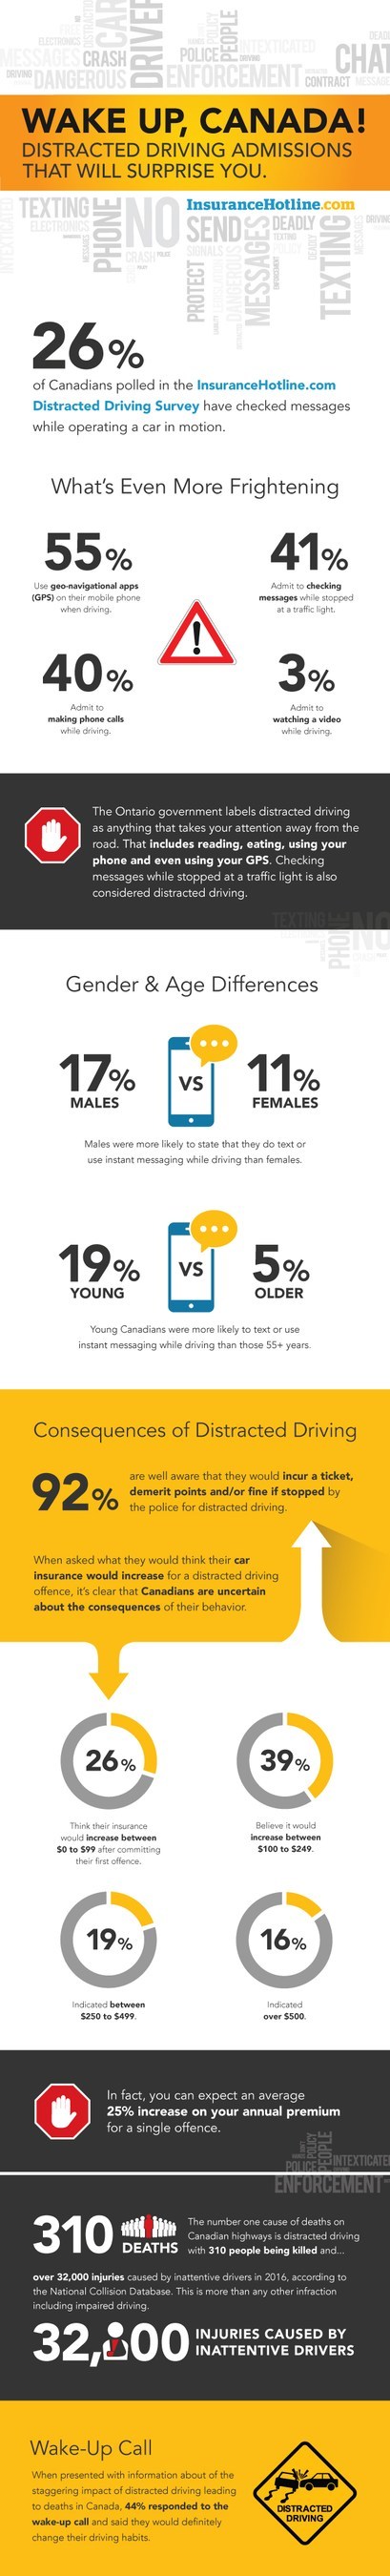 Distracted Driving Survey Infographic (CNW Group/InsuranceHotline.com)